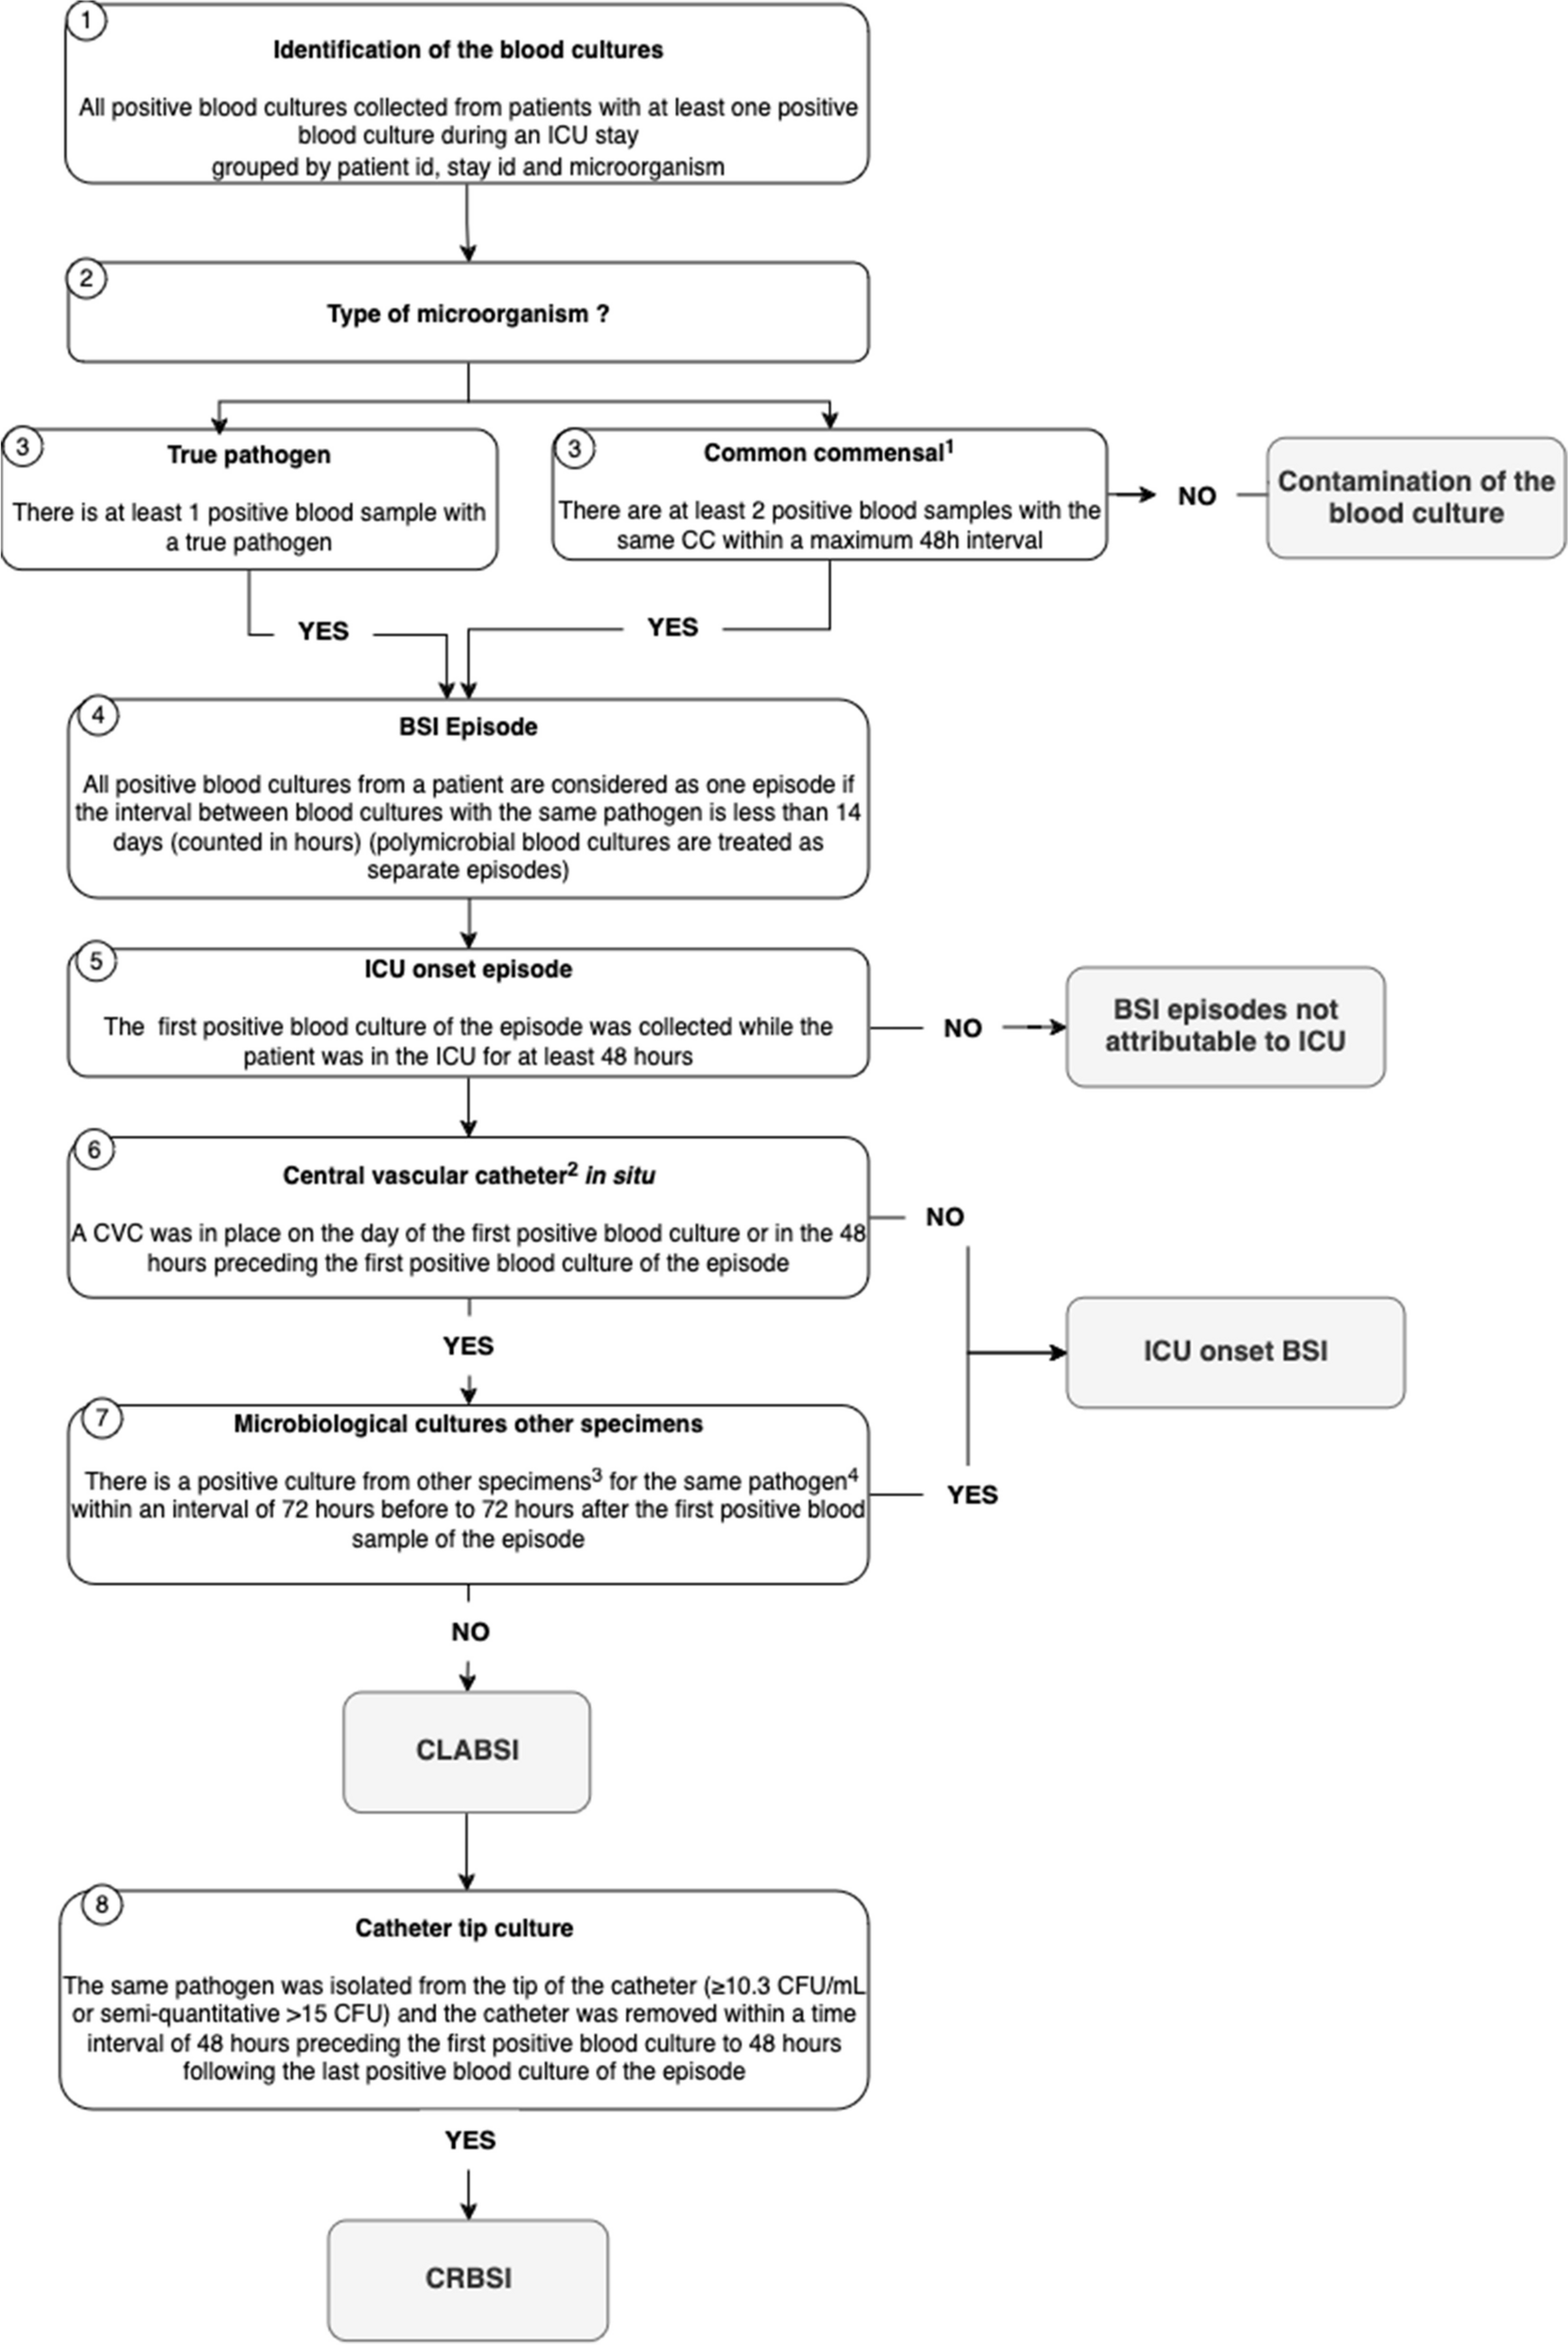 Surveillance of catheter-associated bloodstream infections: development and validation of a fully automated algorithm